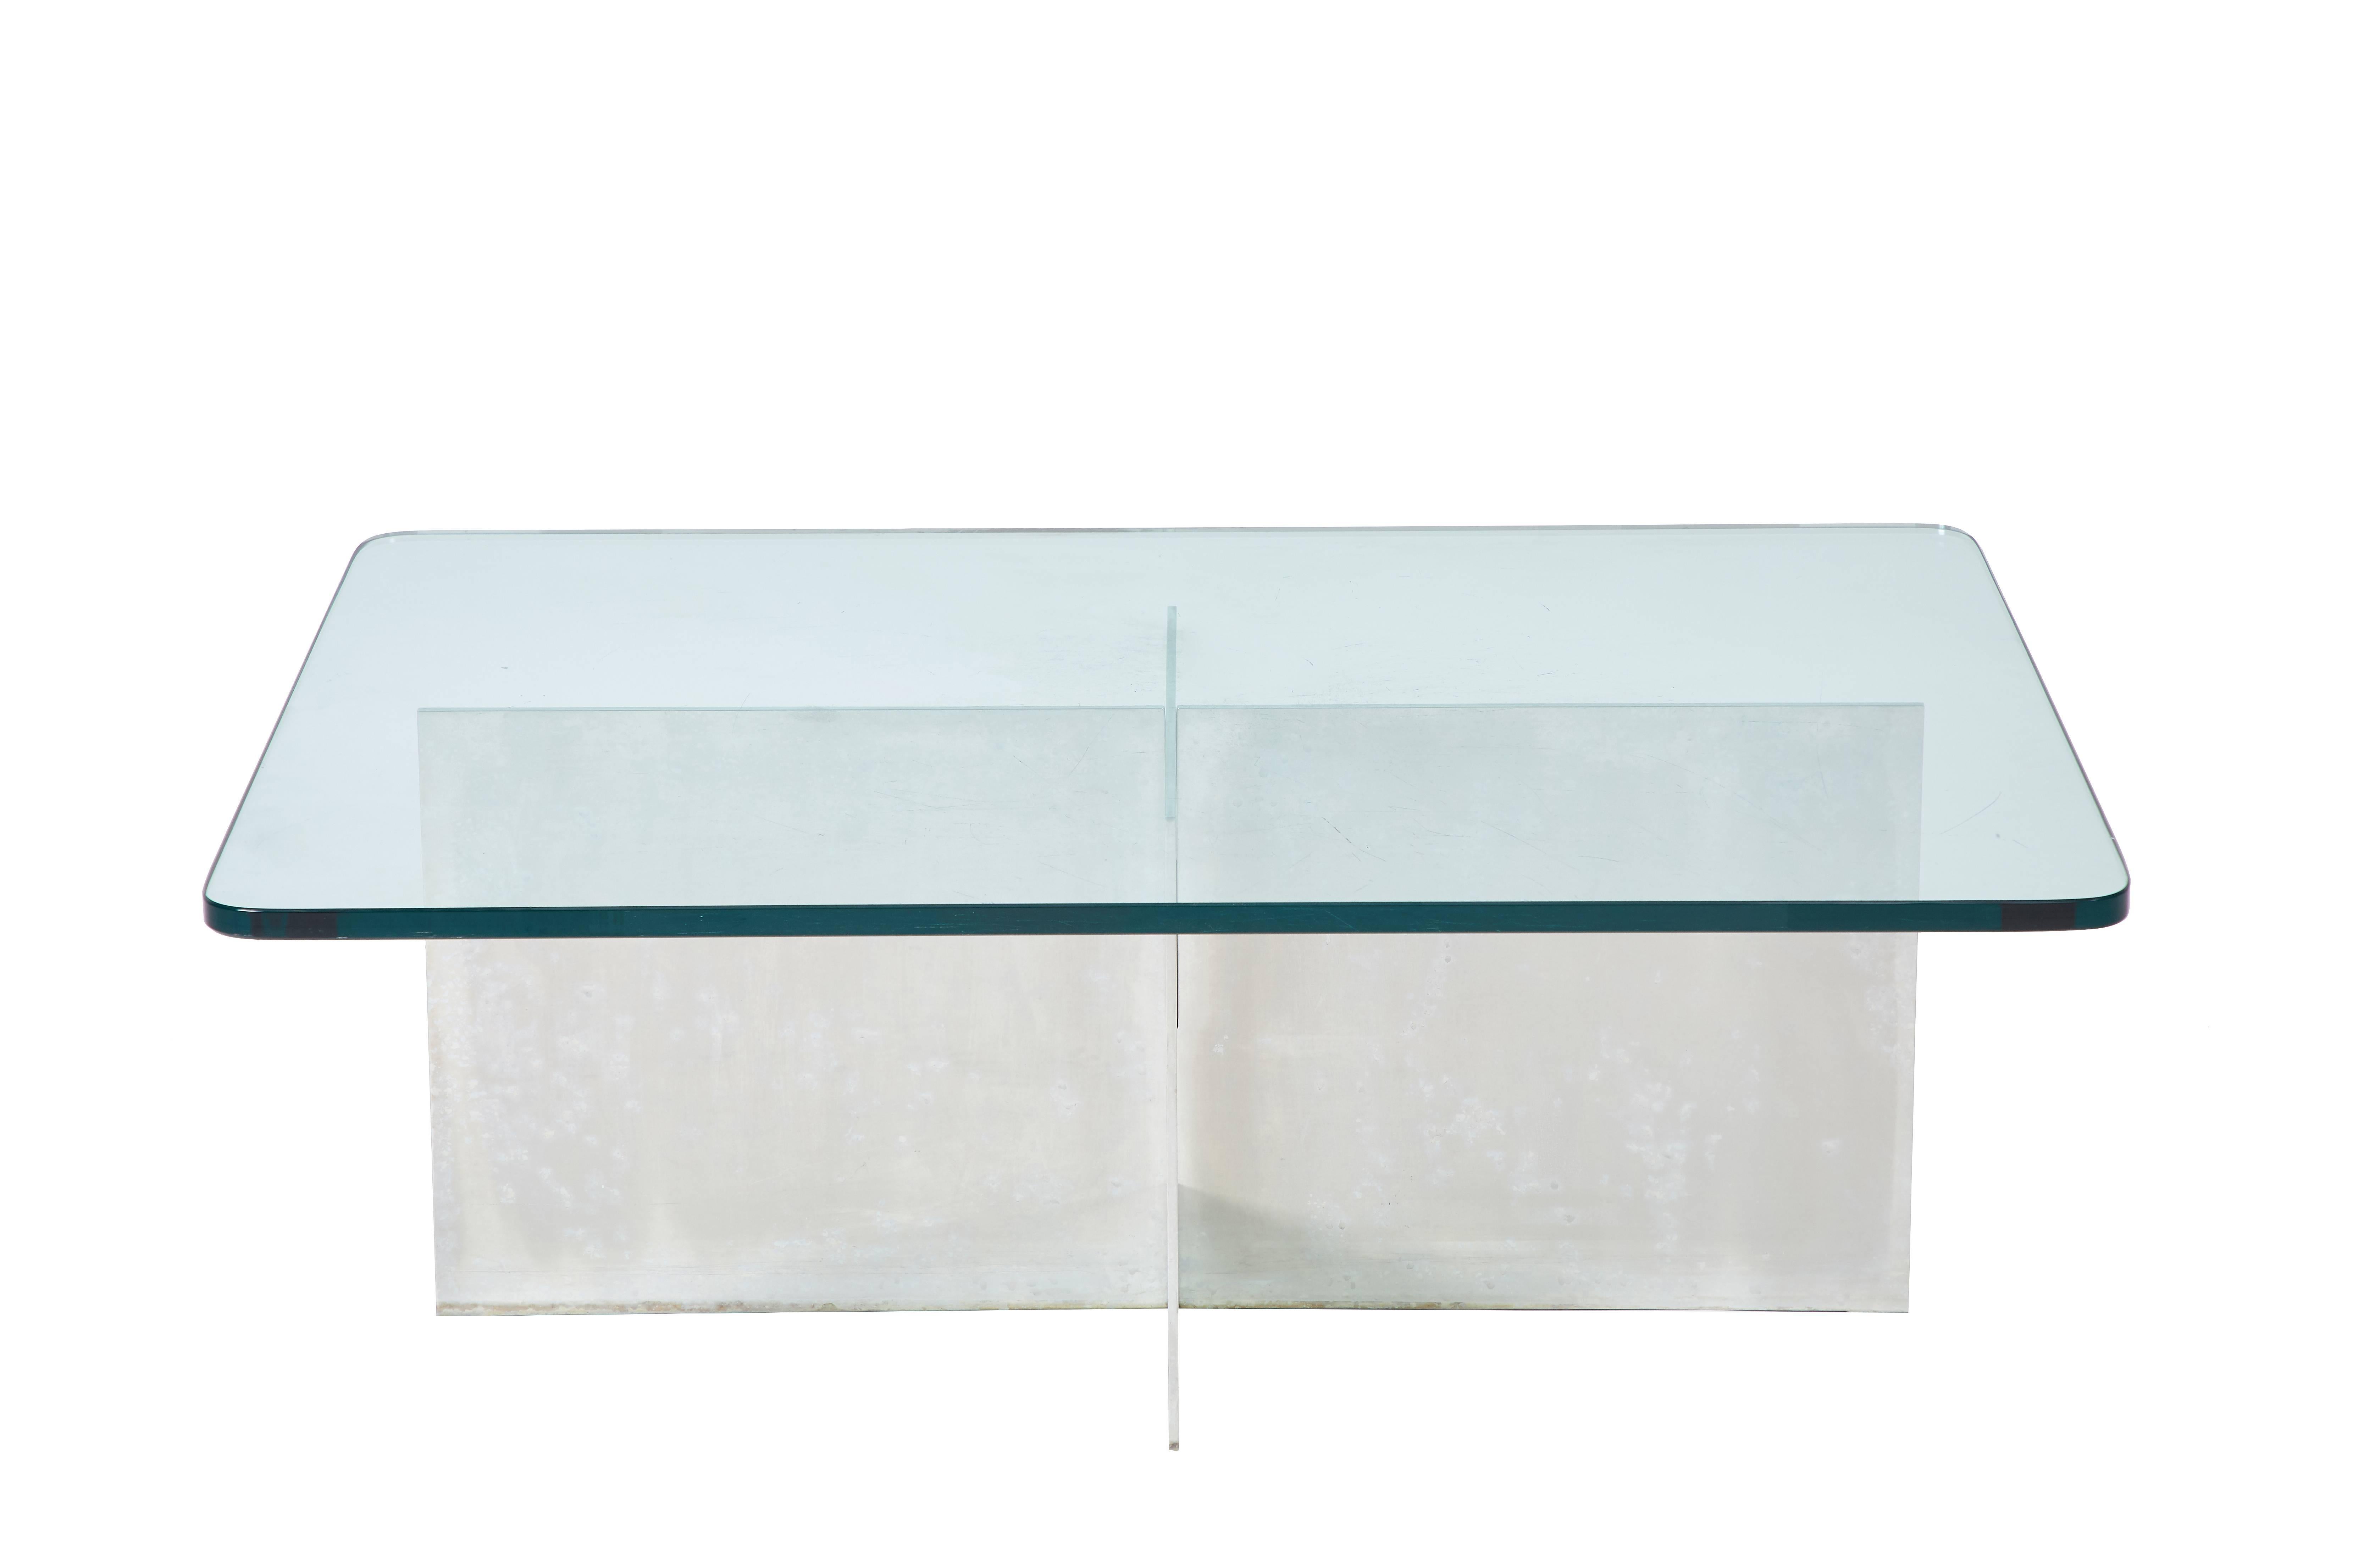 5' ft coffee table by Paul Mayen for Habitat with "x" aluminum base and thick glass tabletop, base impressed with model number, American, circa 1970s.

